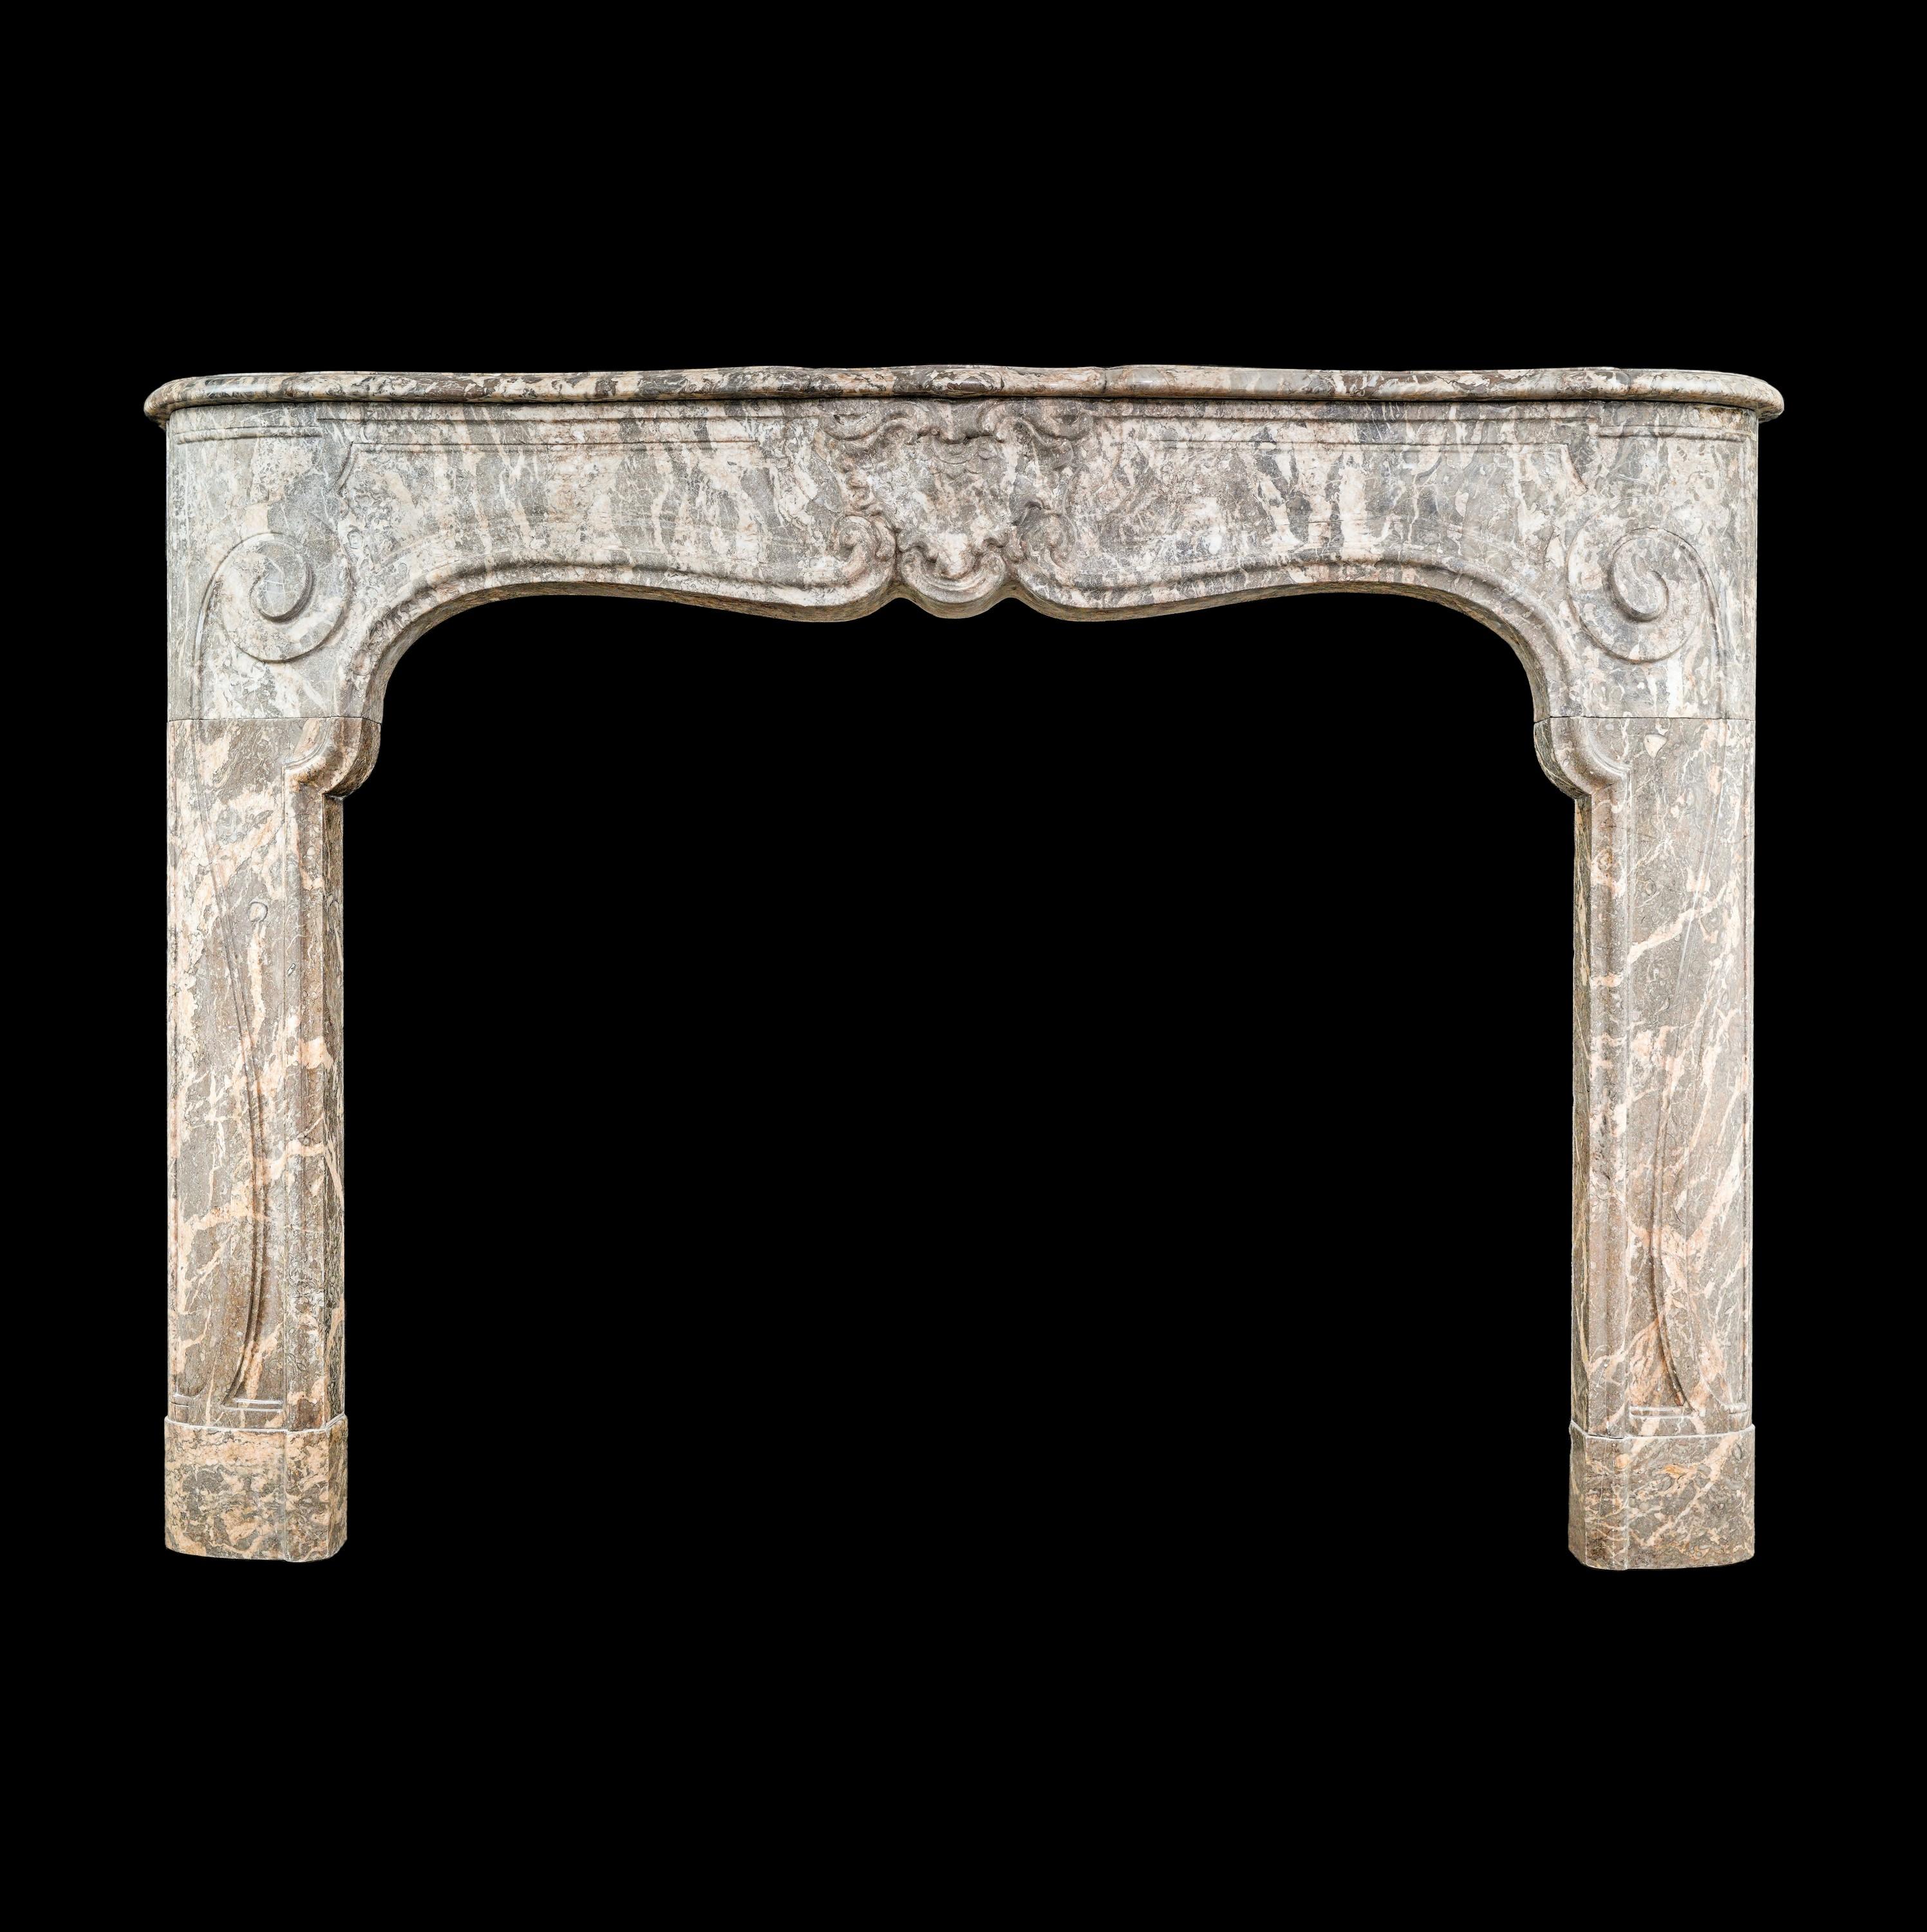 A harmonious palette of gray, light brown, and tan hues blend together to create an inviting, earthy ambiance in this Louis XV marble mantel. Its design is truly distinctive, featuring gracefully curved lines that ascend from rounded plinths into